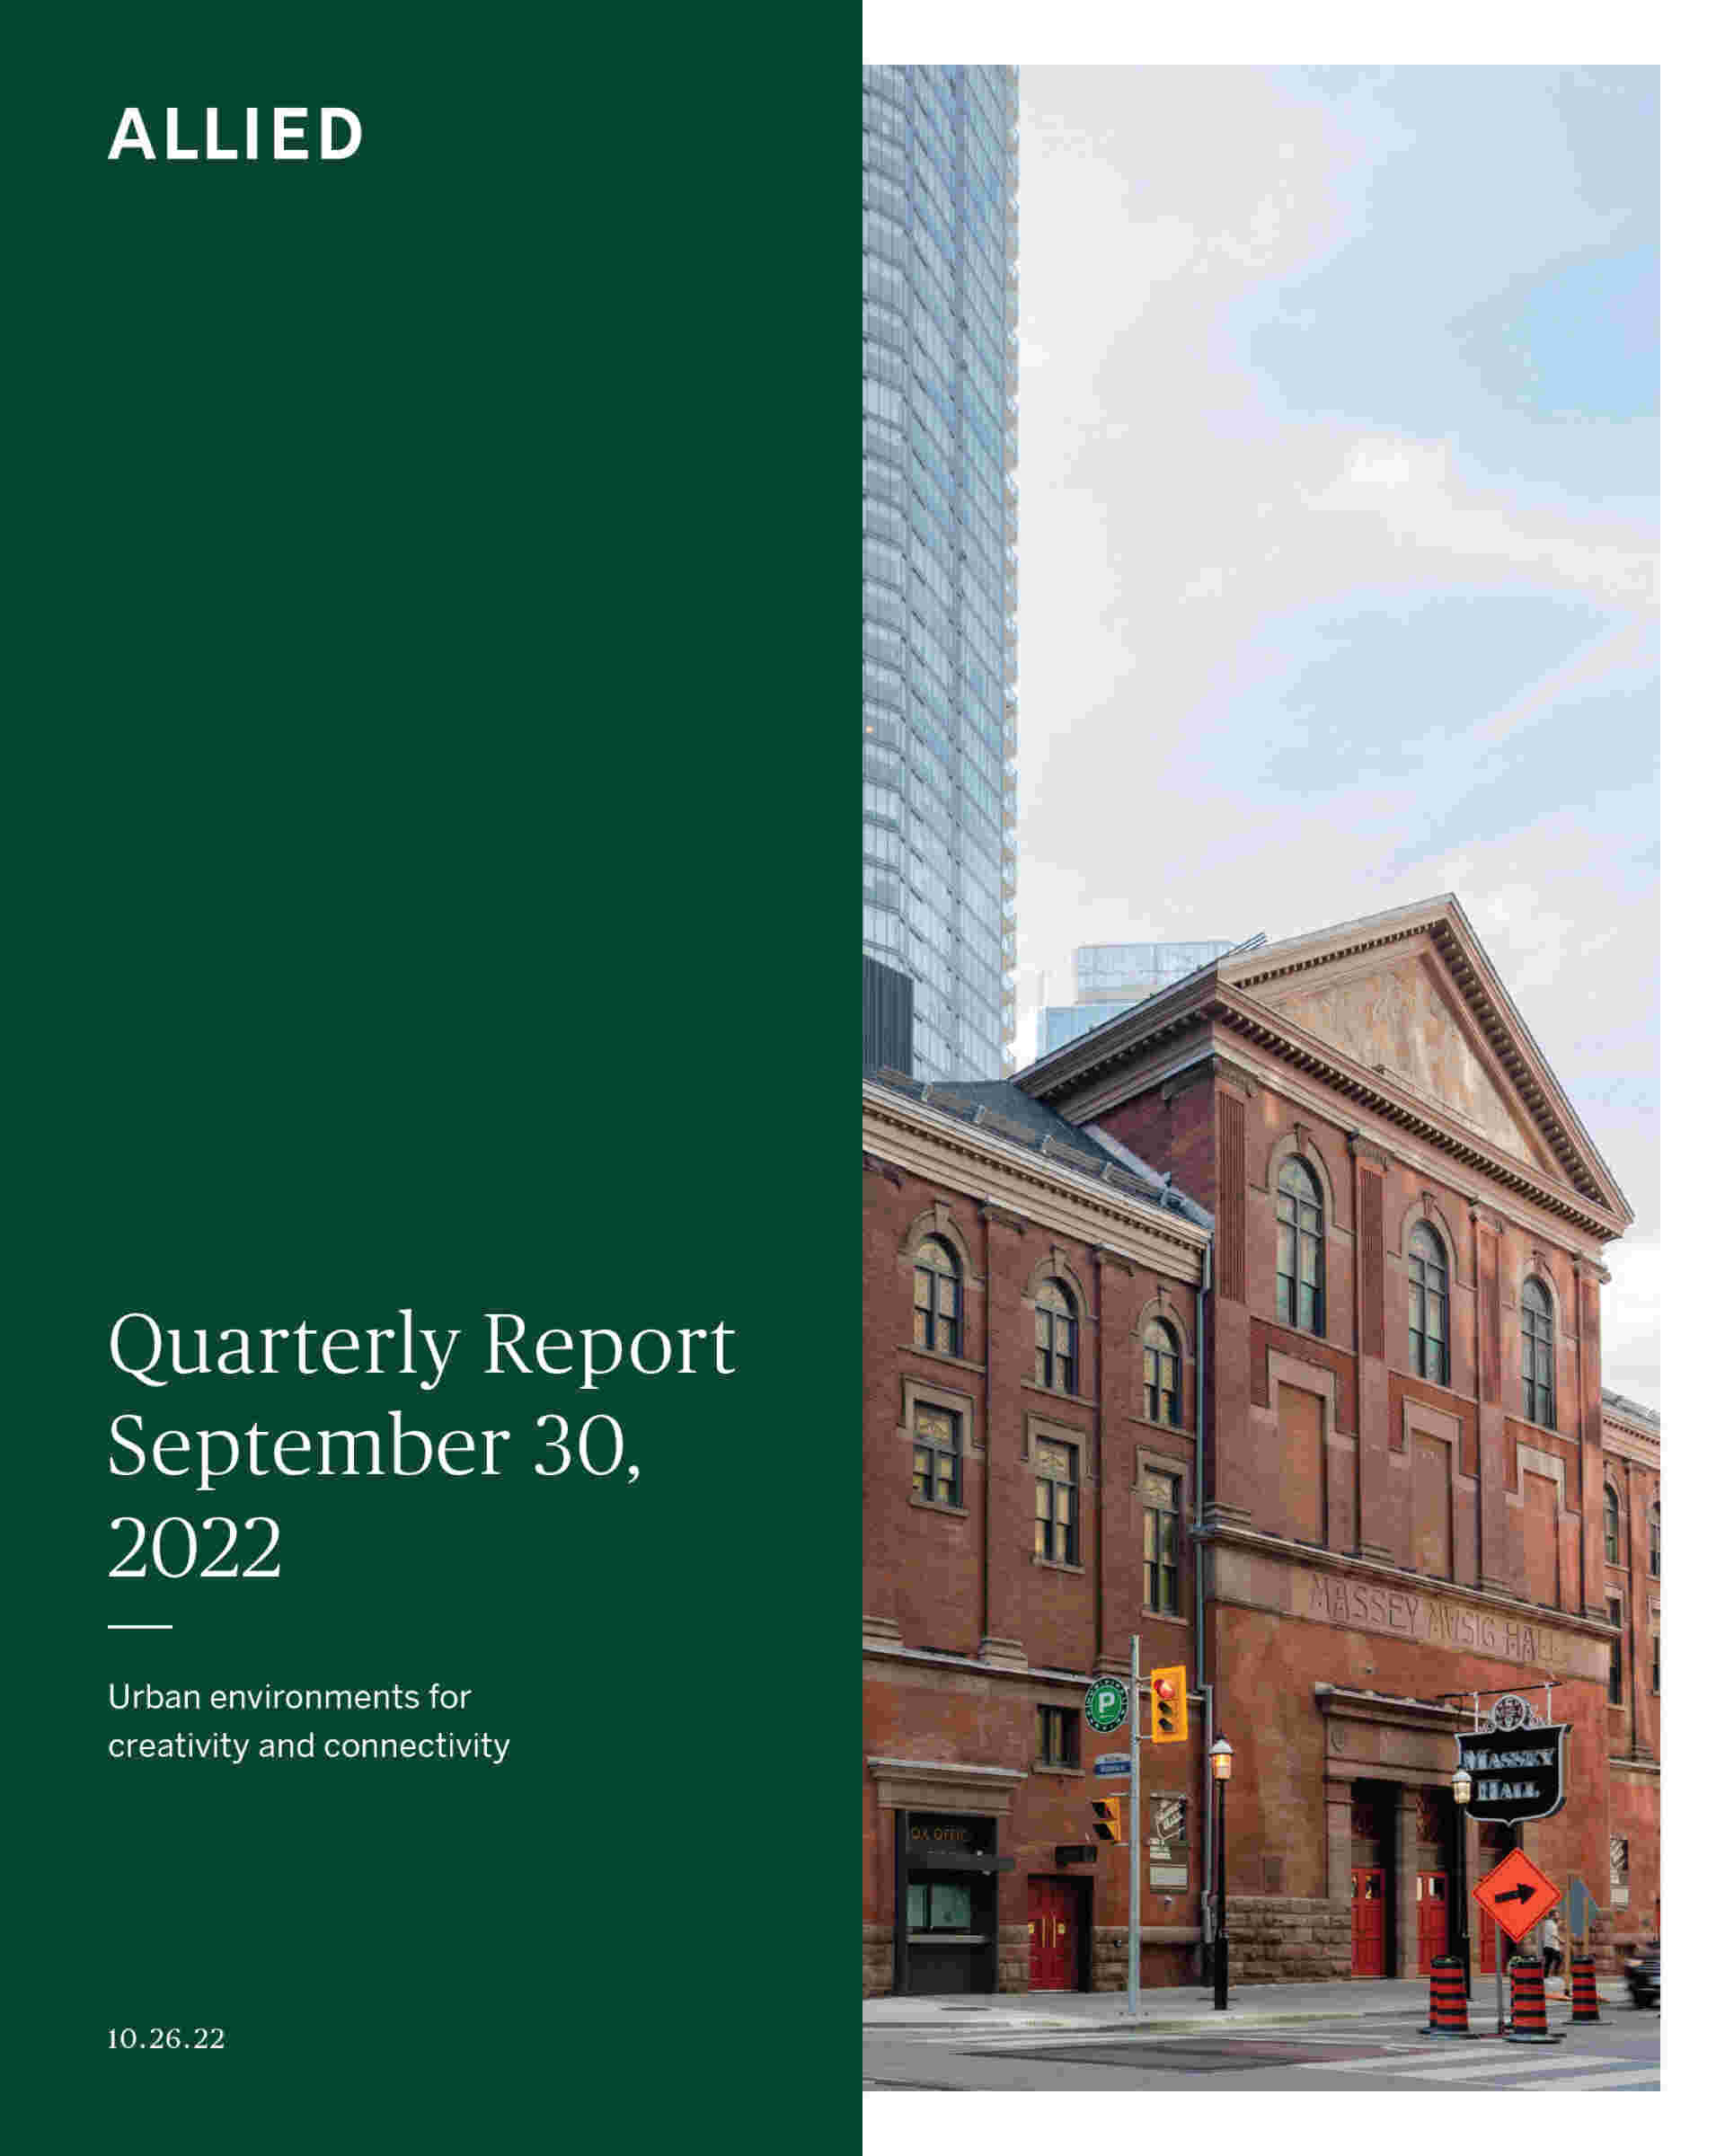 Financial Reports 2021 - Allied_Q3Report_October-26-2022-1